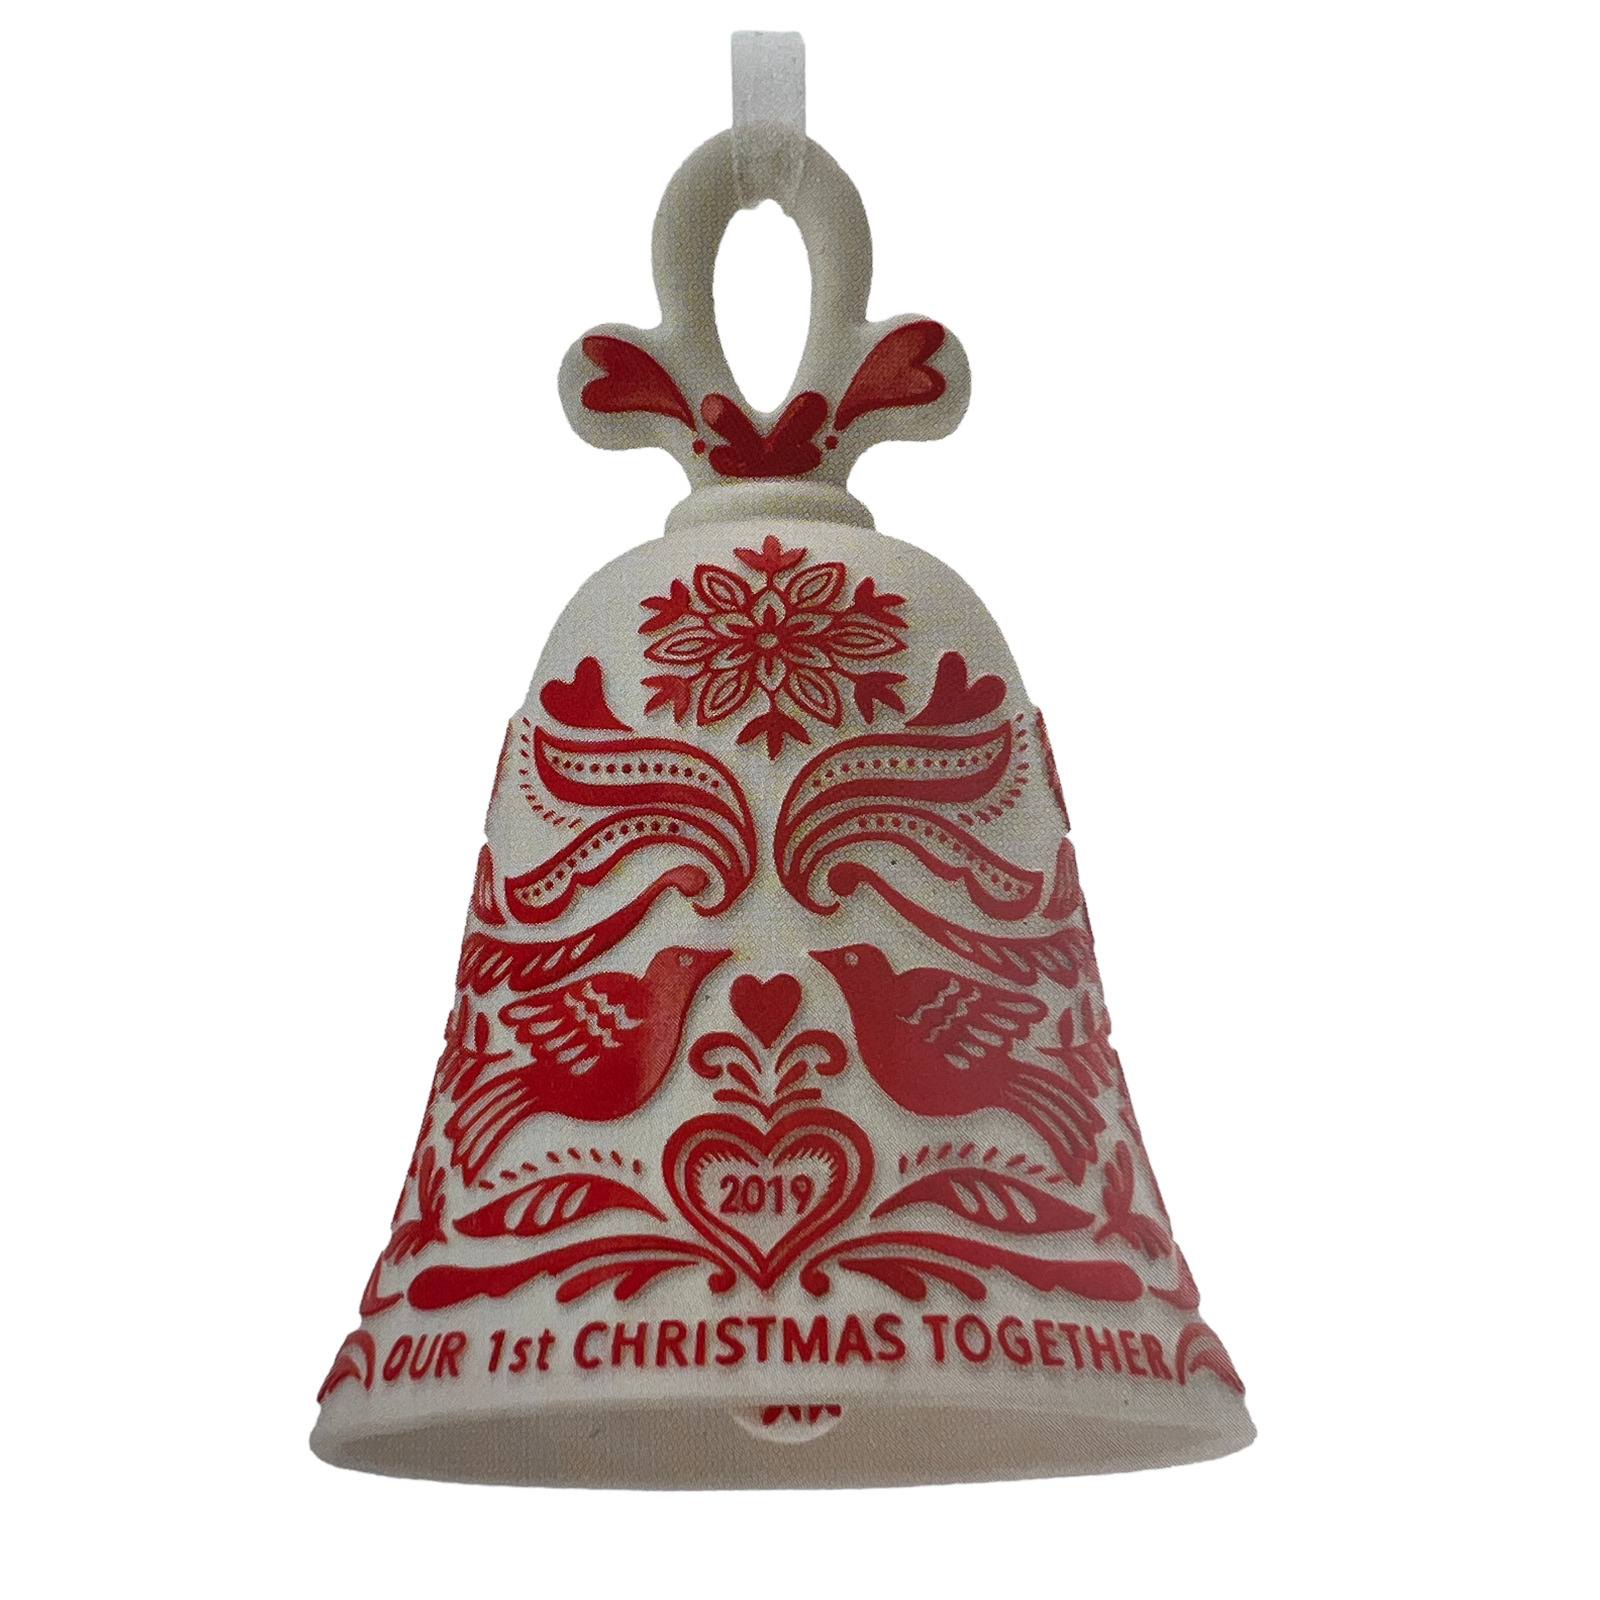 New Hallmark Our 1st Christmas Together Red & White Bell 2019